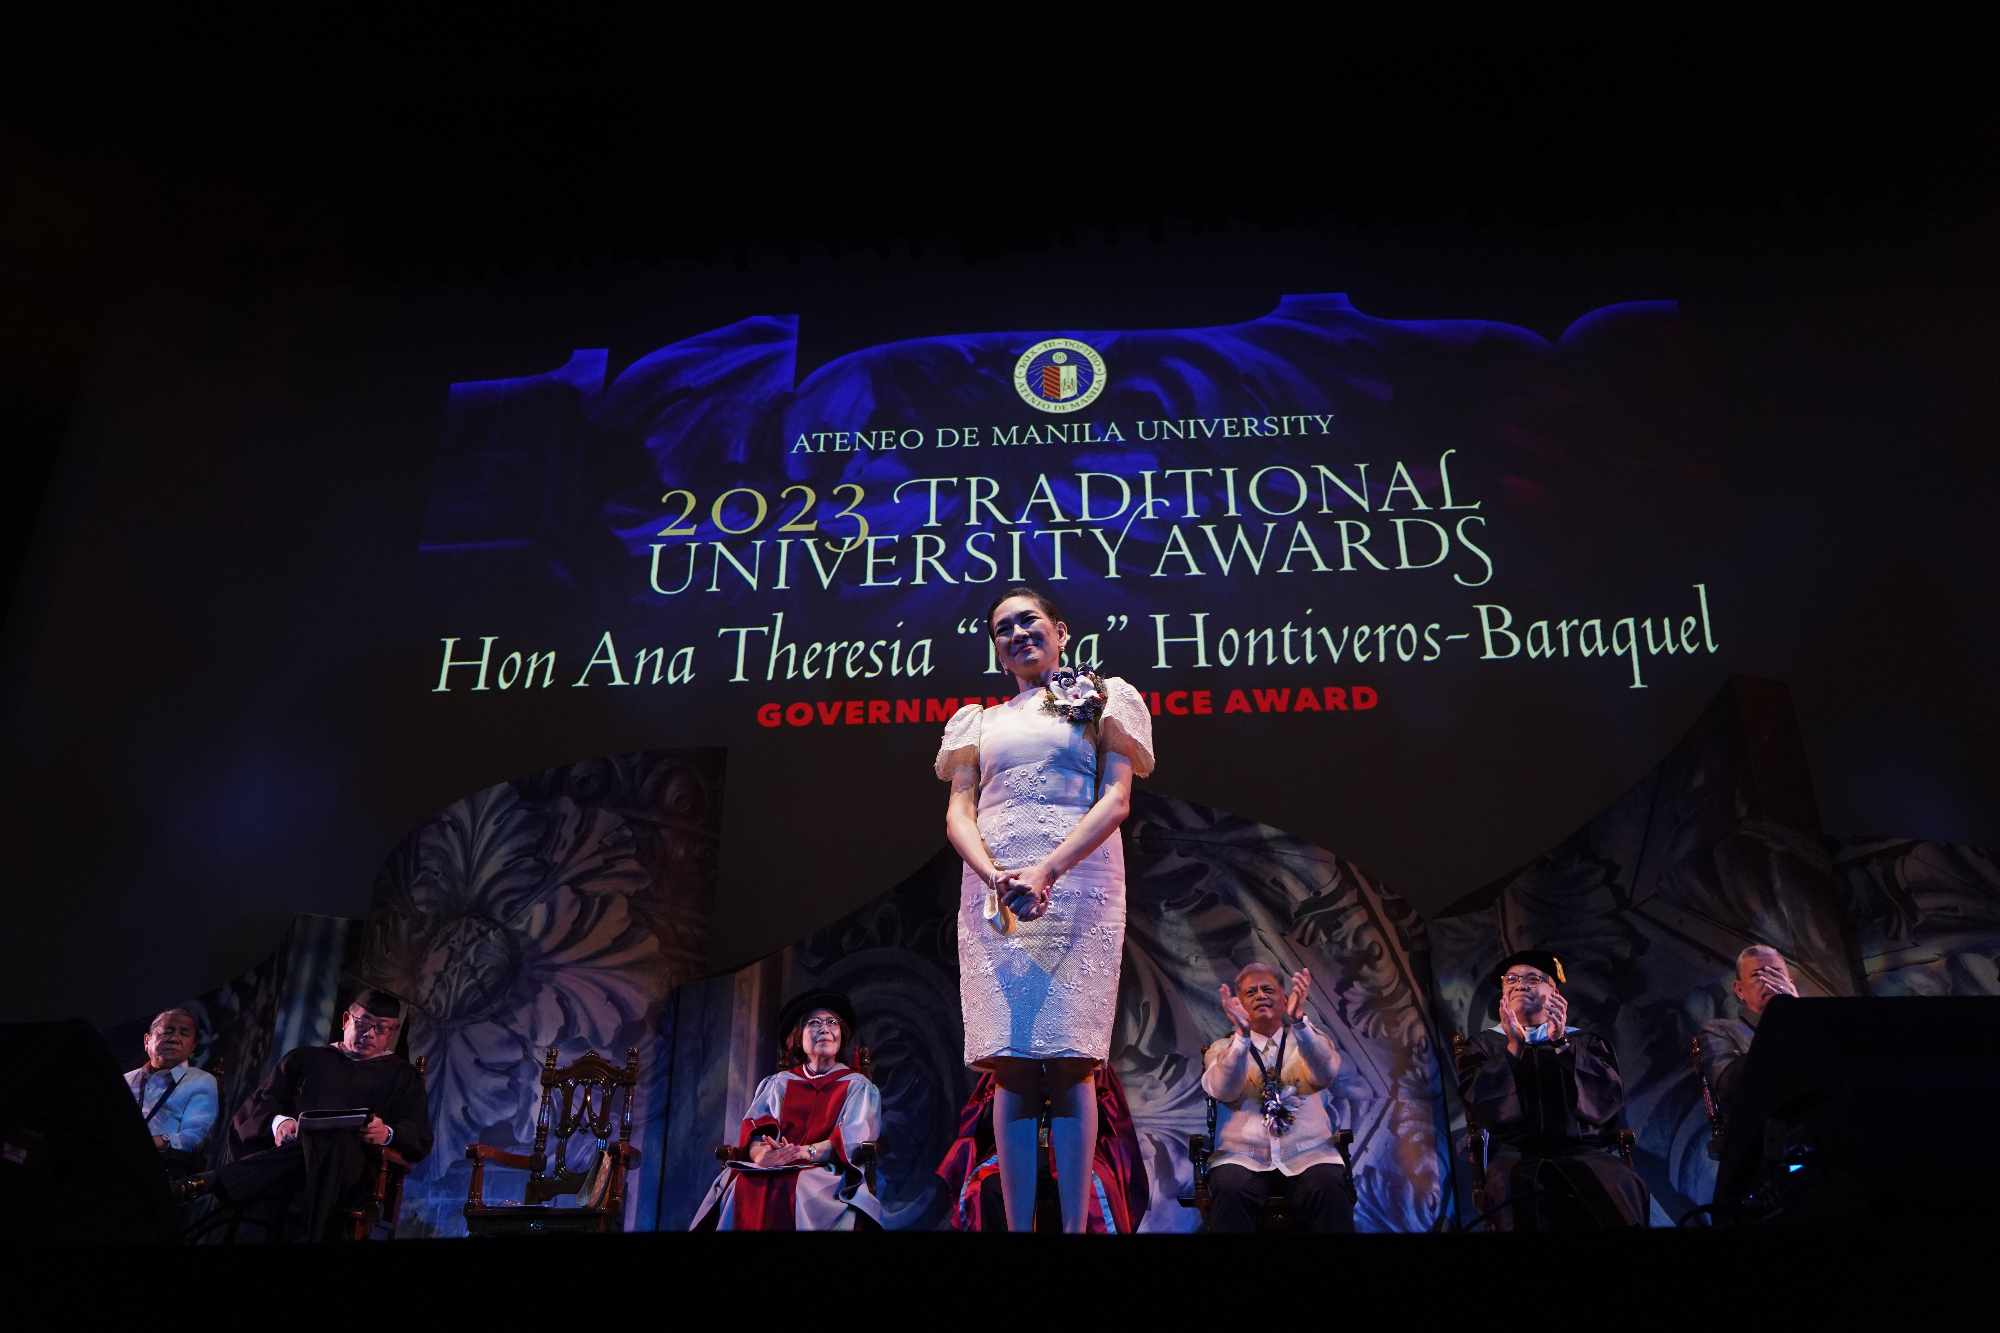 Hon Risa Hontiveros-Baraquel stands centerstage during the reading of her citation